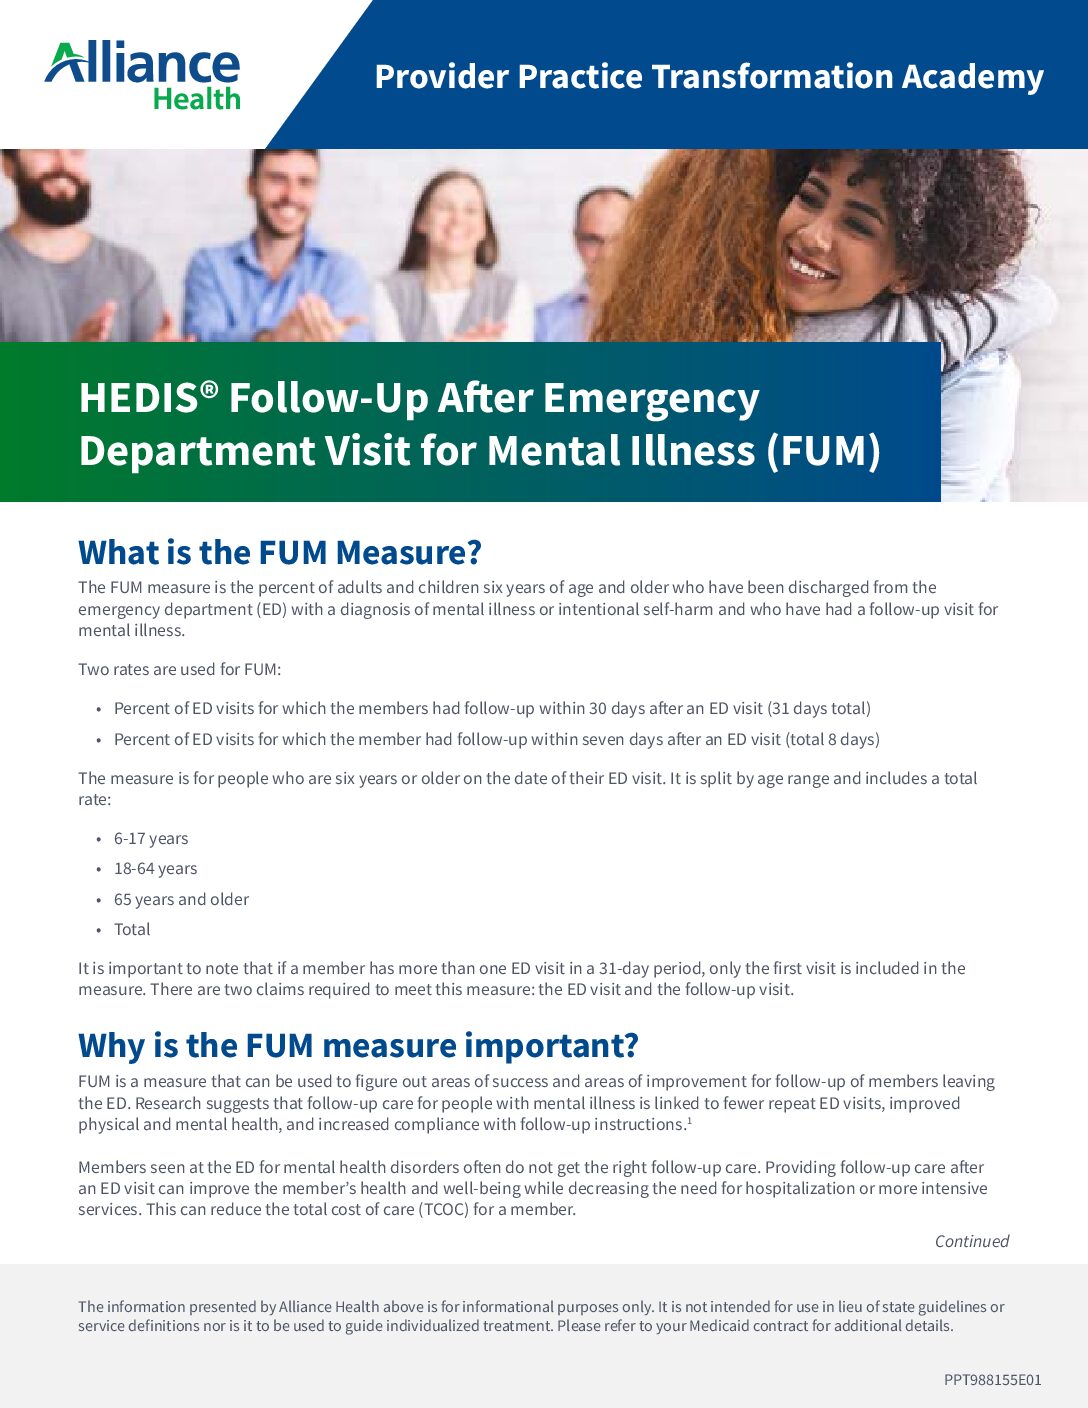 HEDIS® Follow-Up After Emergency Department Visit for Mental Illness (FUM)